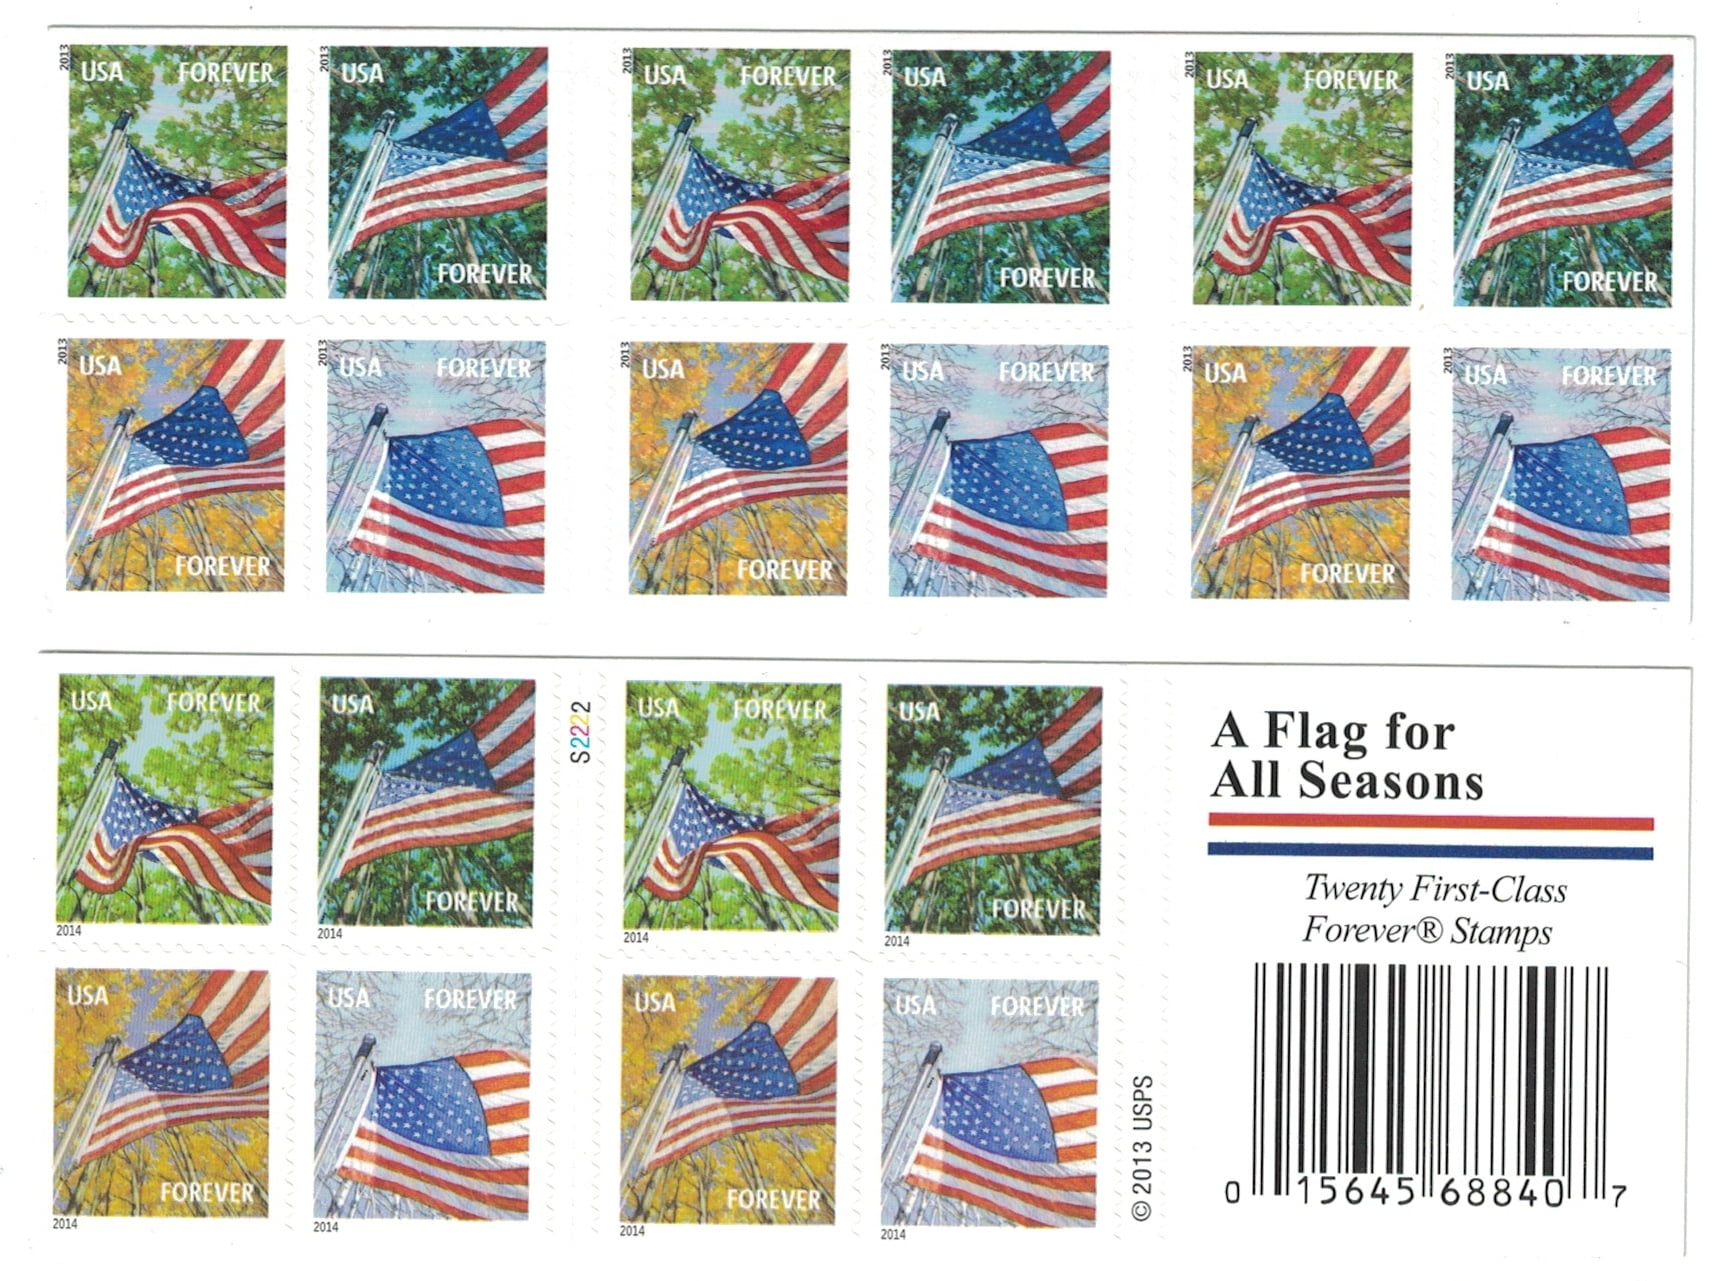 5 x ATM Booklets of 18 USPS Forever Stamps Four Flags 90 Stamps 